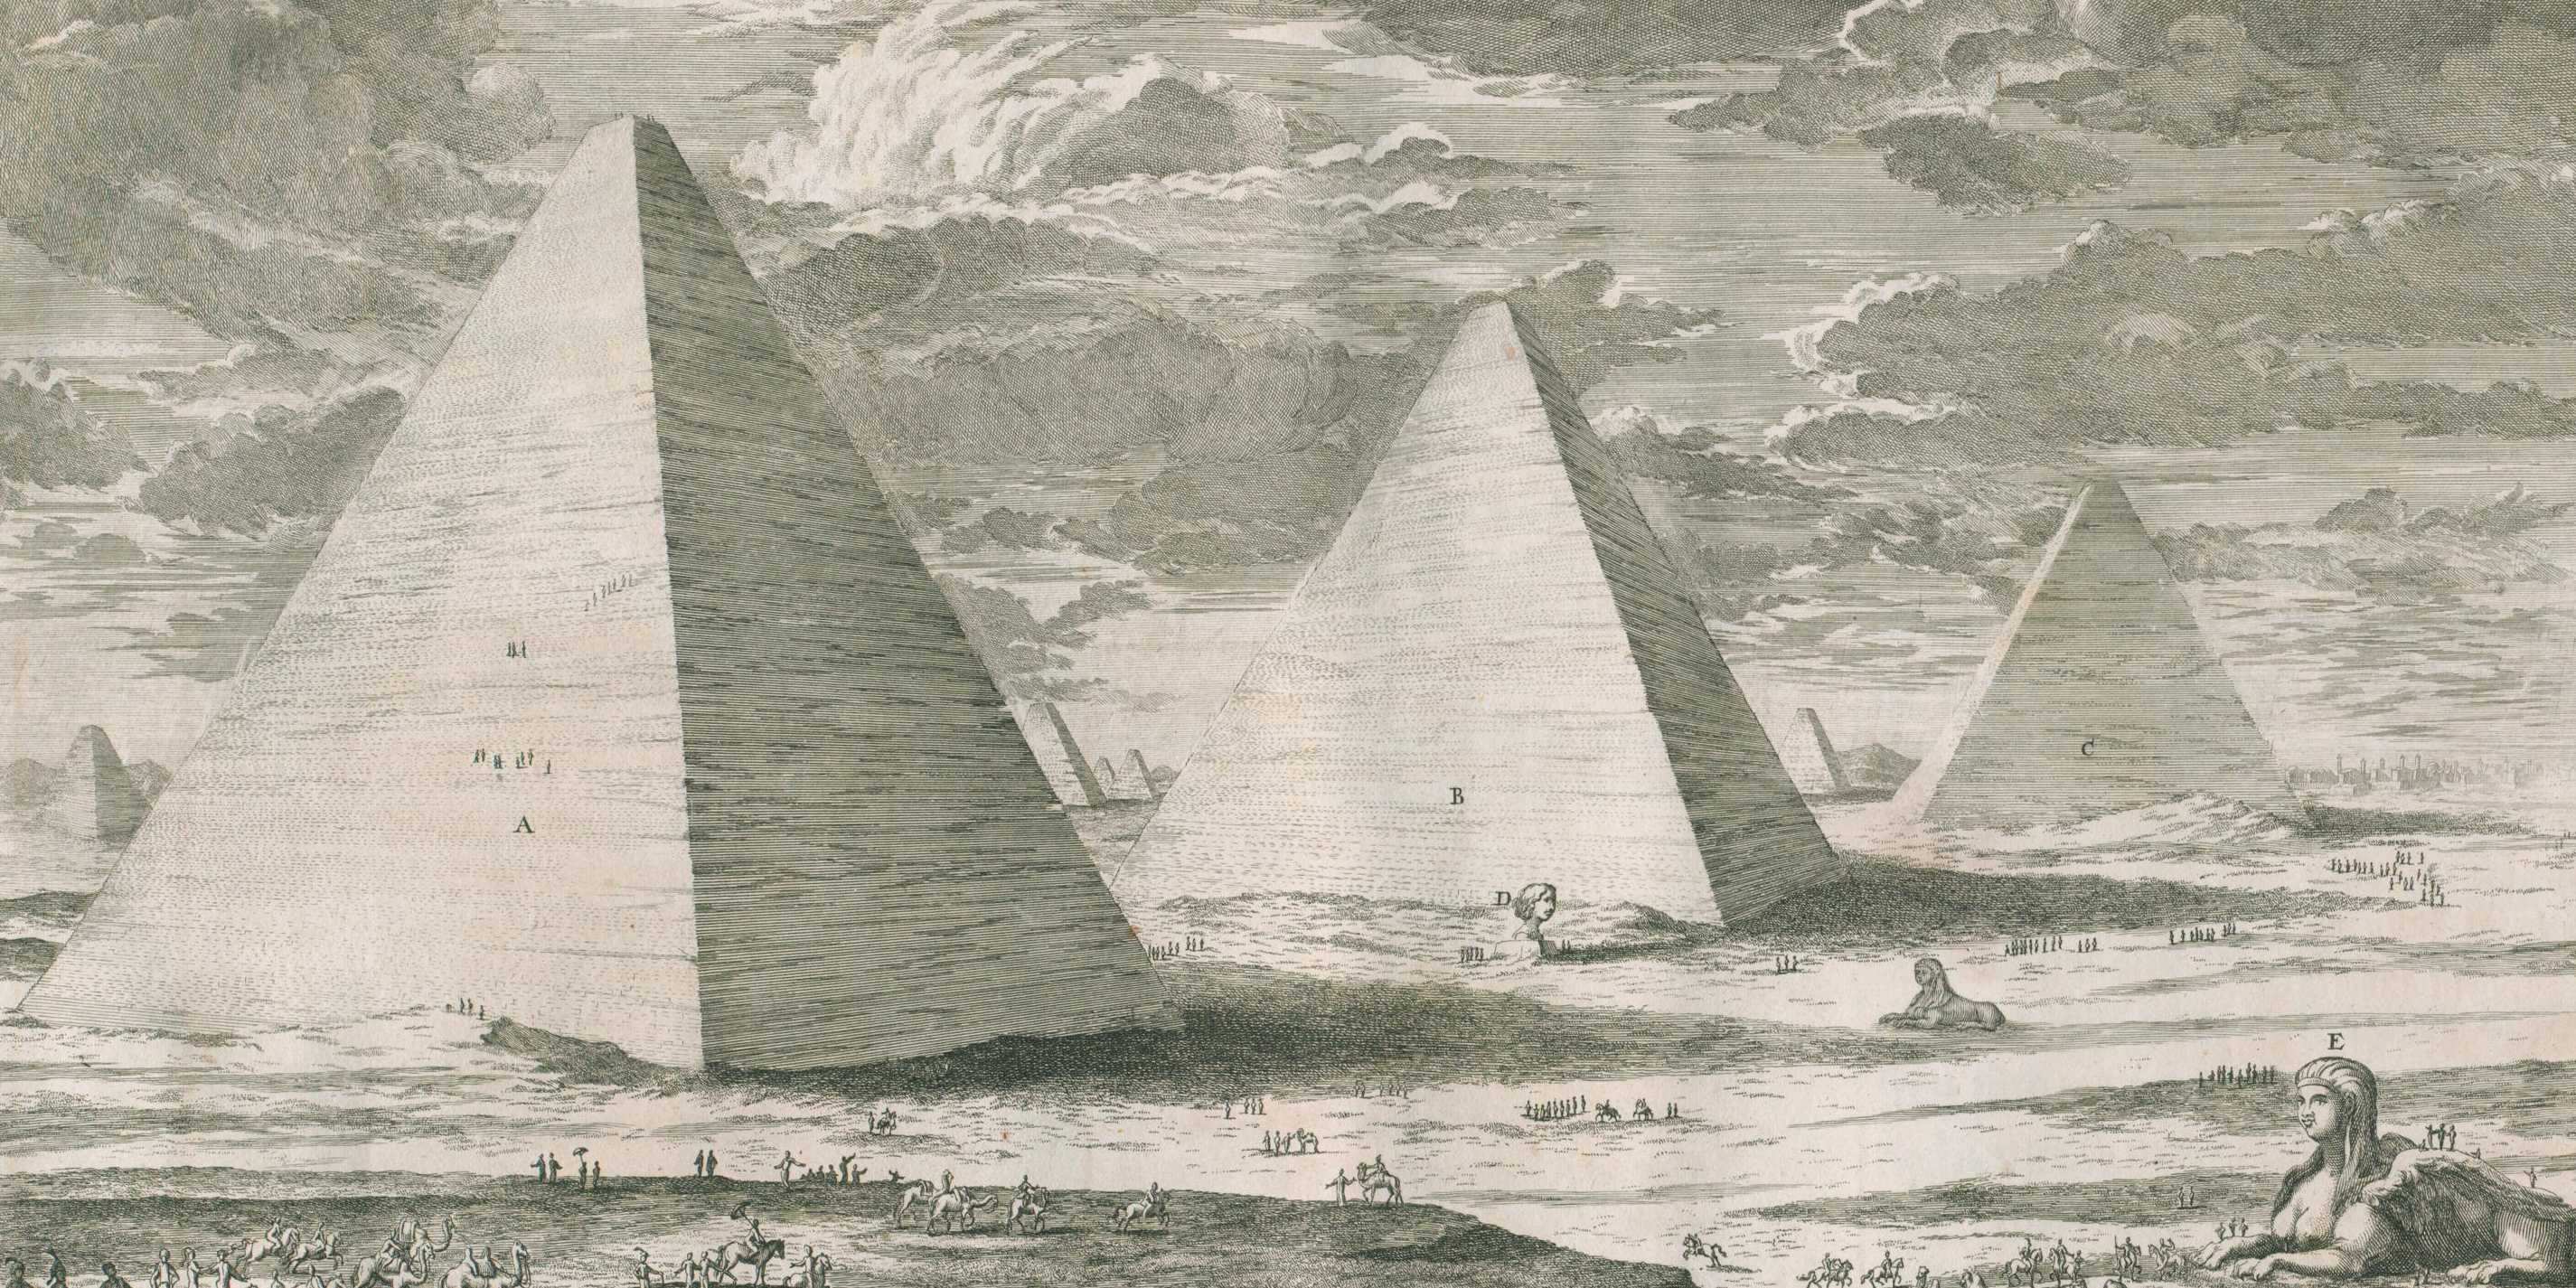 Clipping from the engraving of the Pyramides in Egypt from the book.